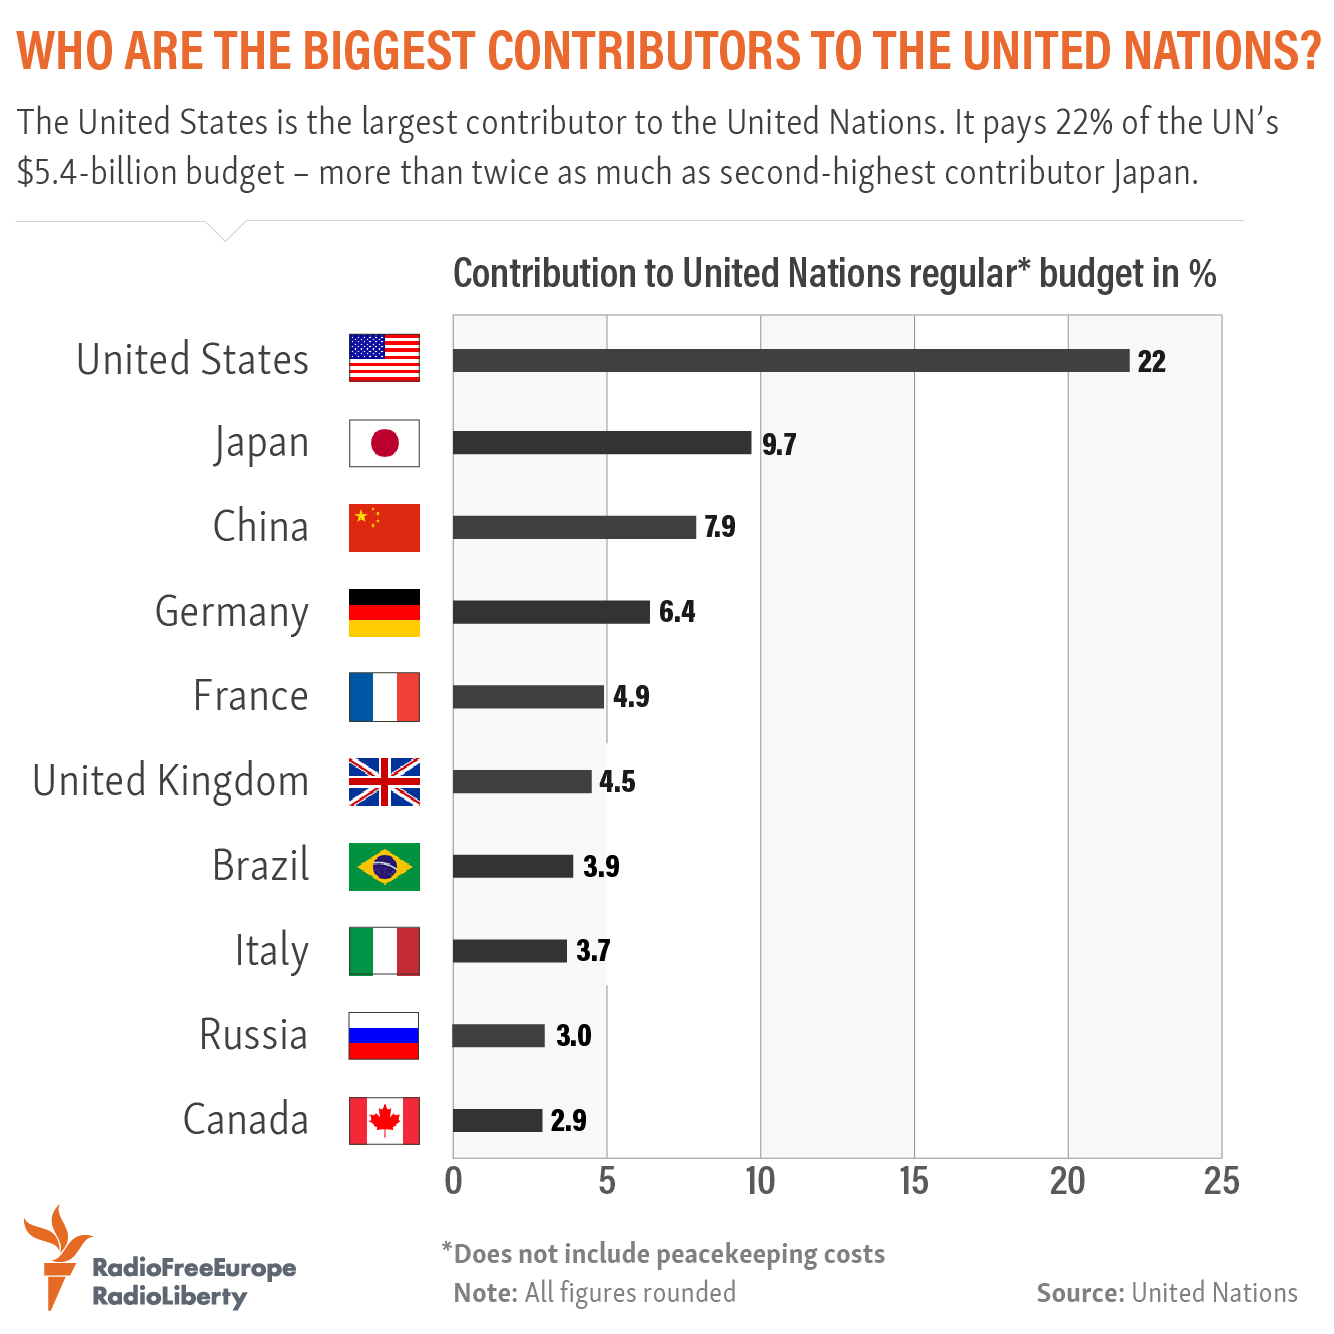 Who Are the Biggest Contributors to the United Nations?